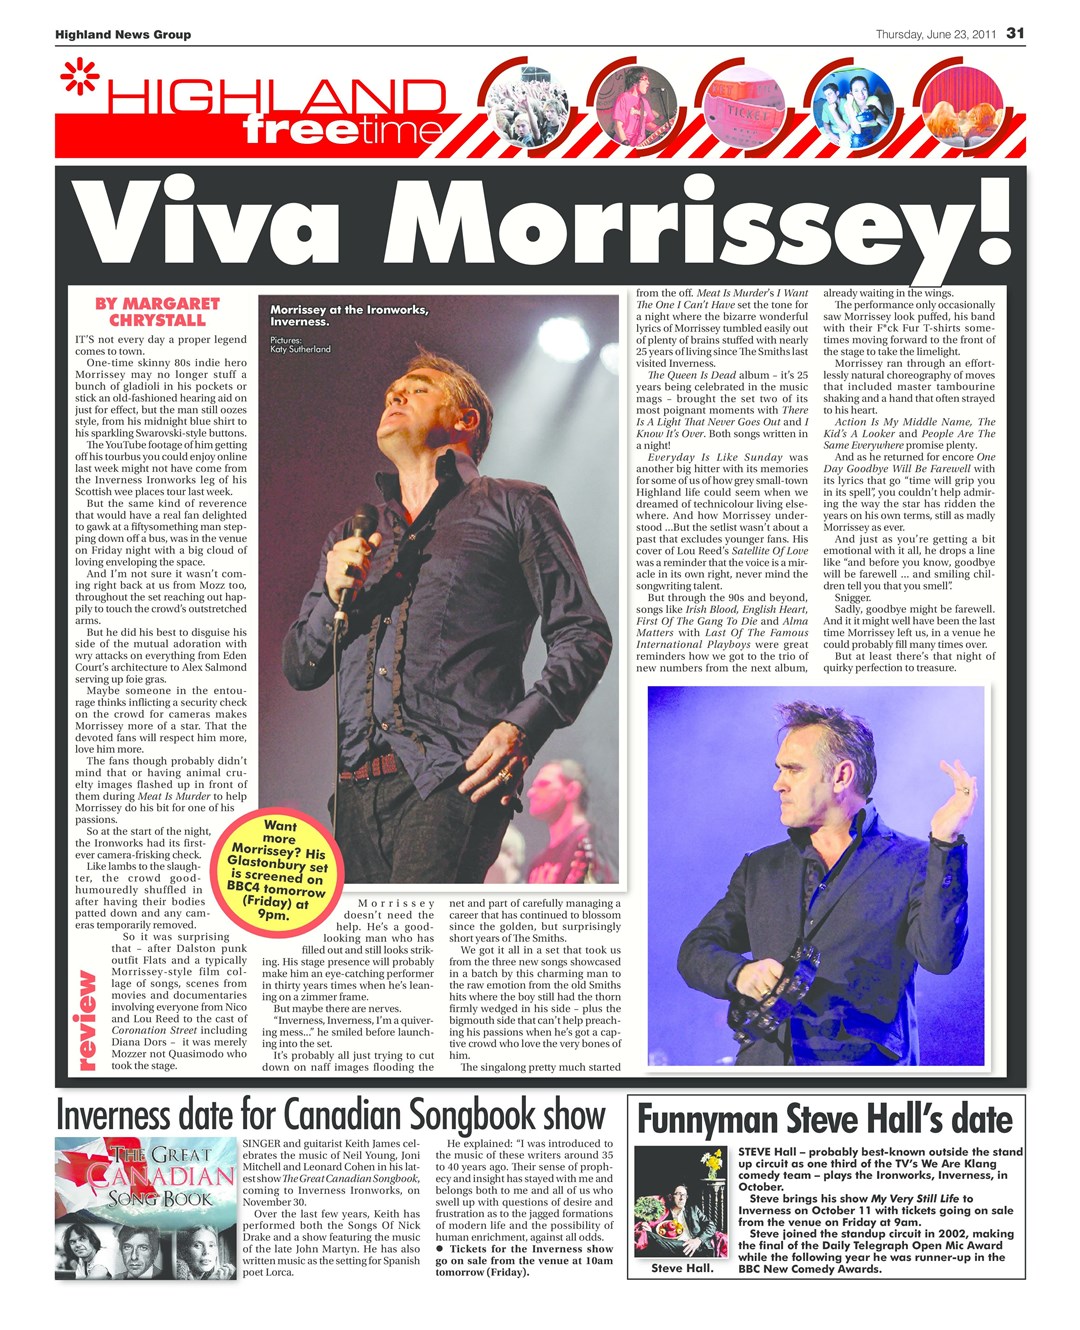 Morrissey mesmerised the crowd and included old Smiths favourites among new series of songs.